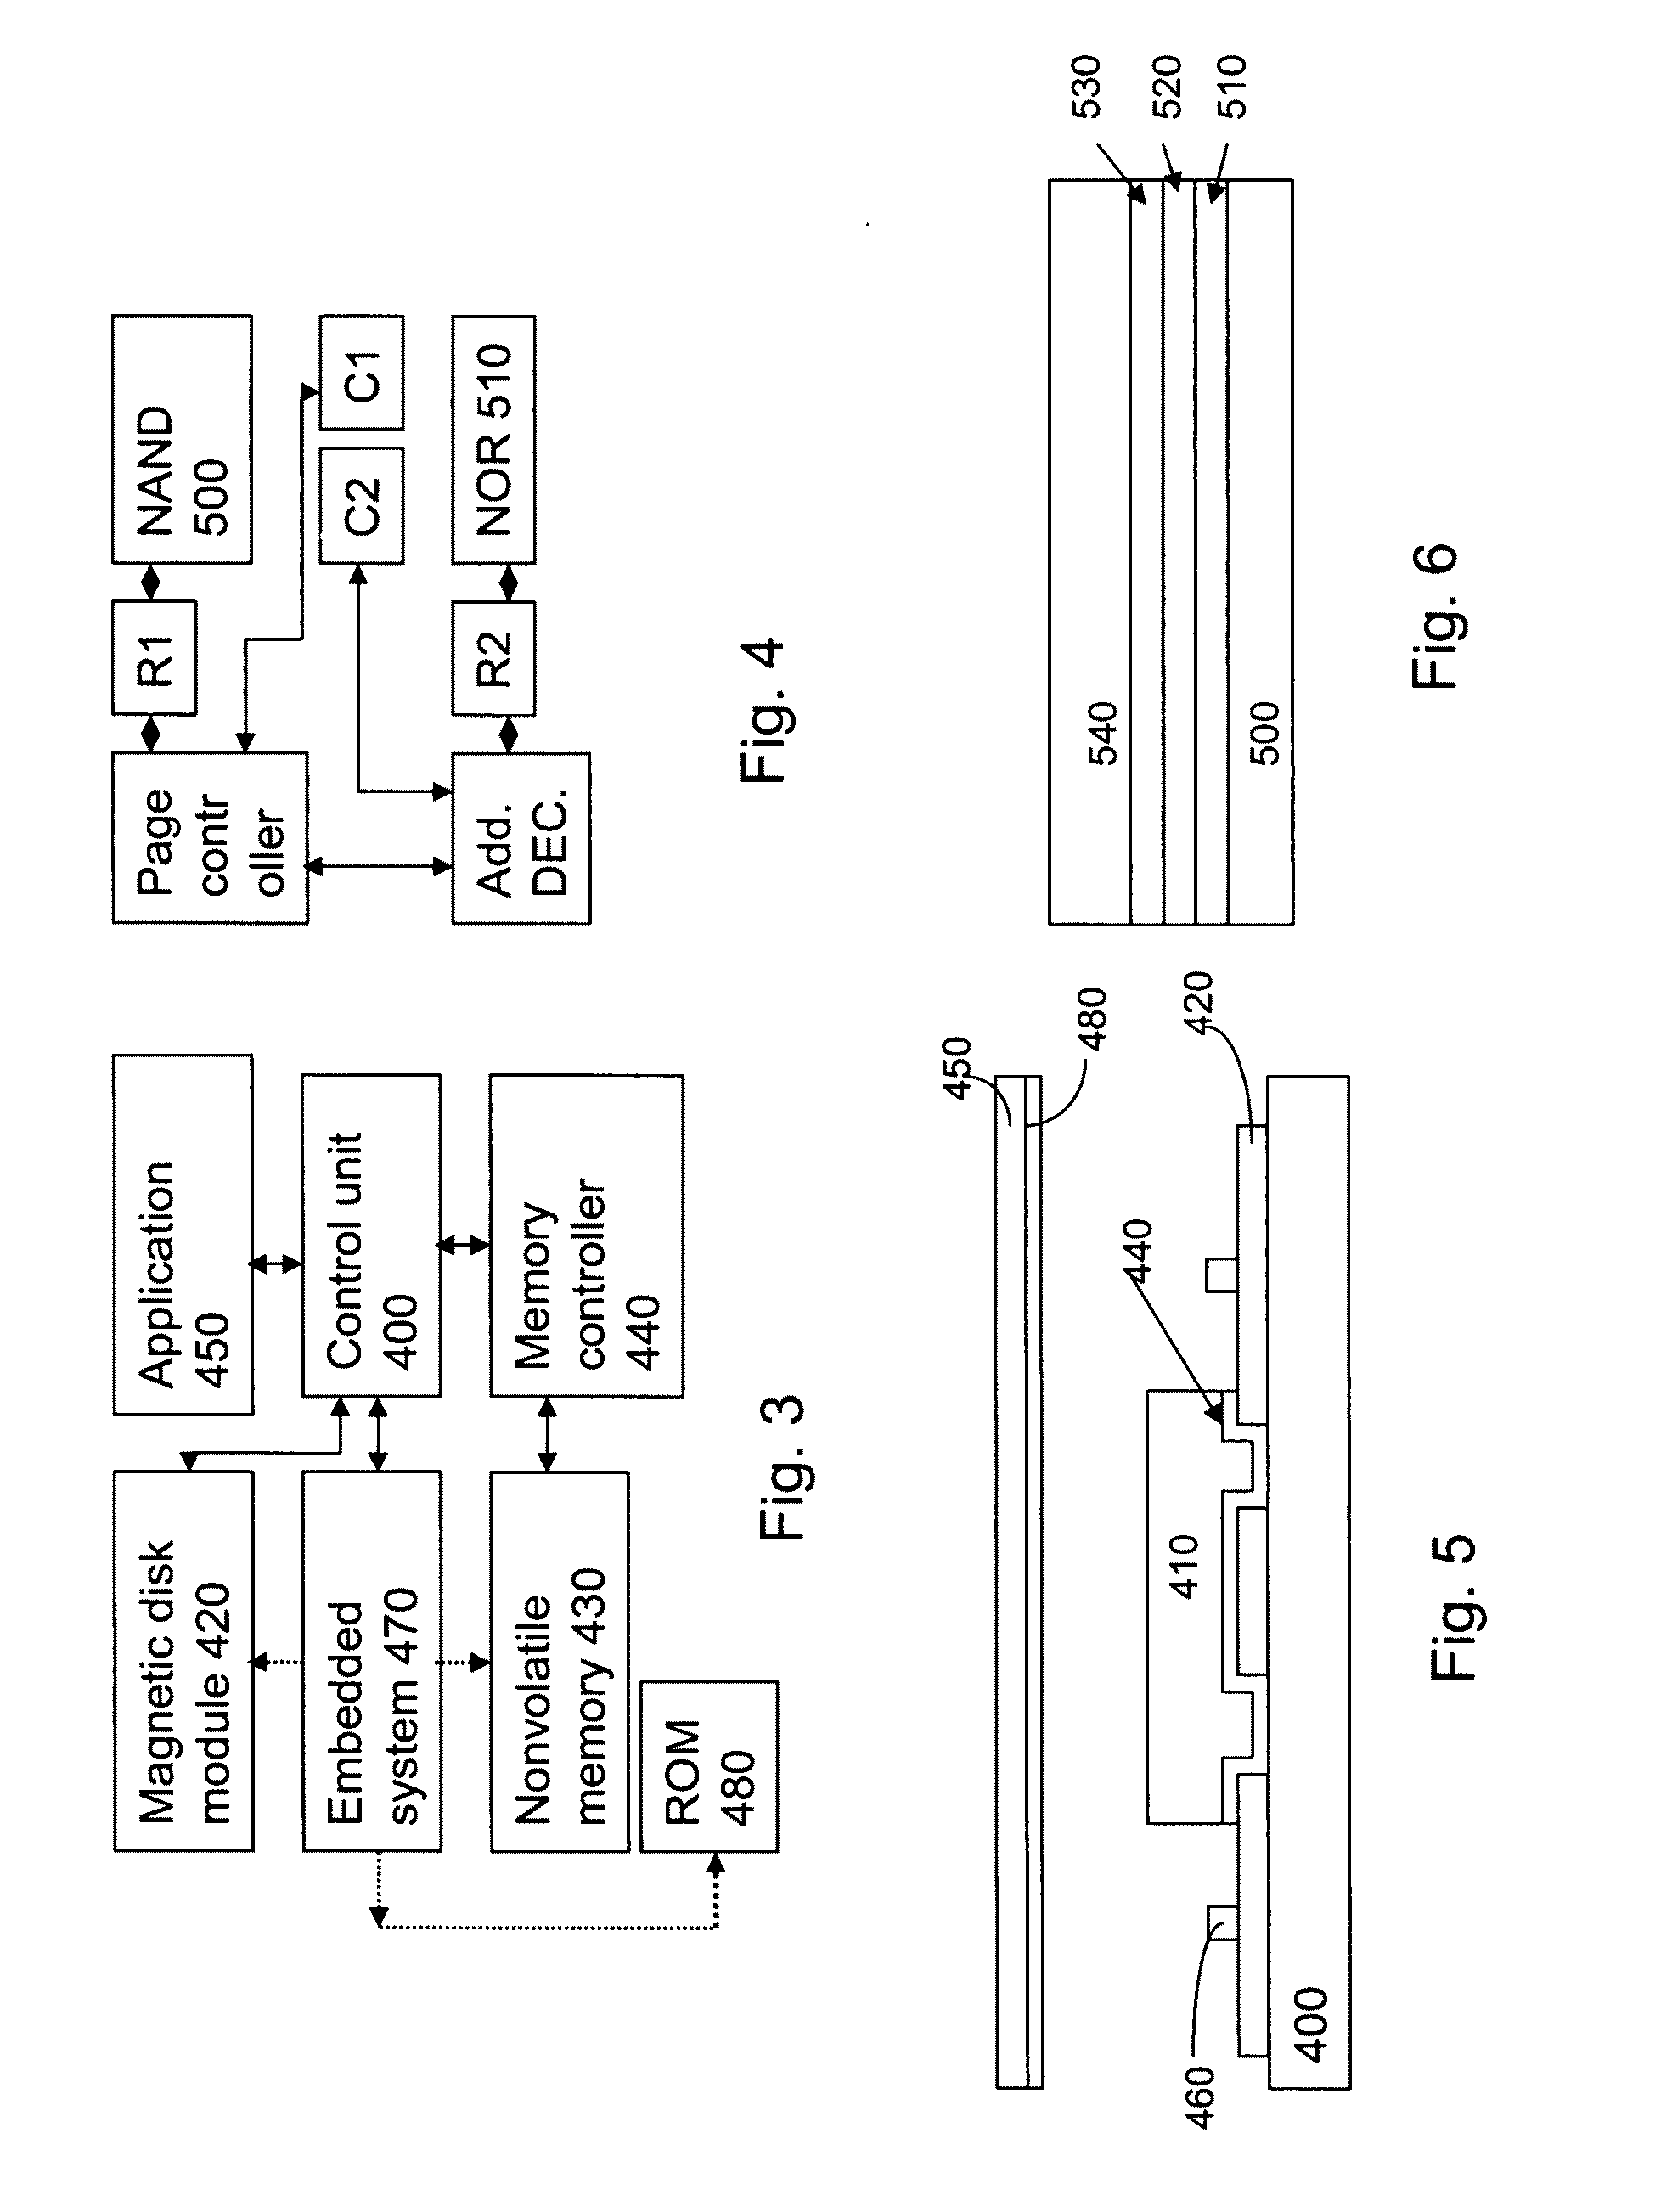 Method of controlling an object by user motion for electronic device